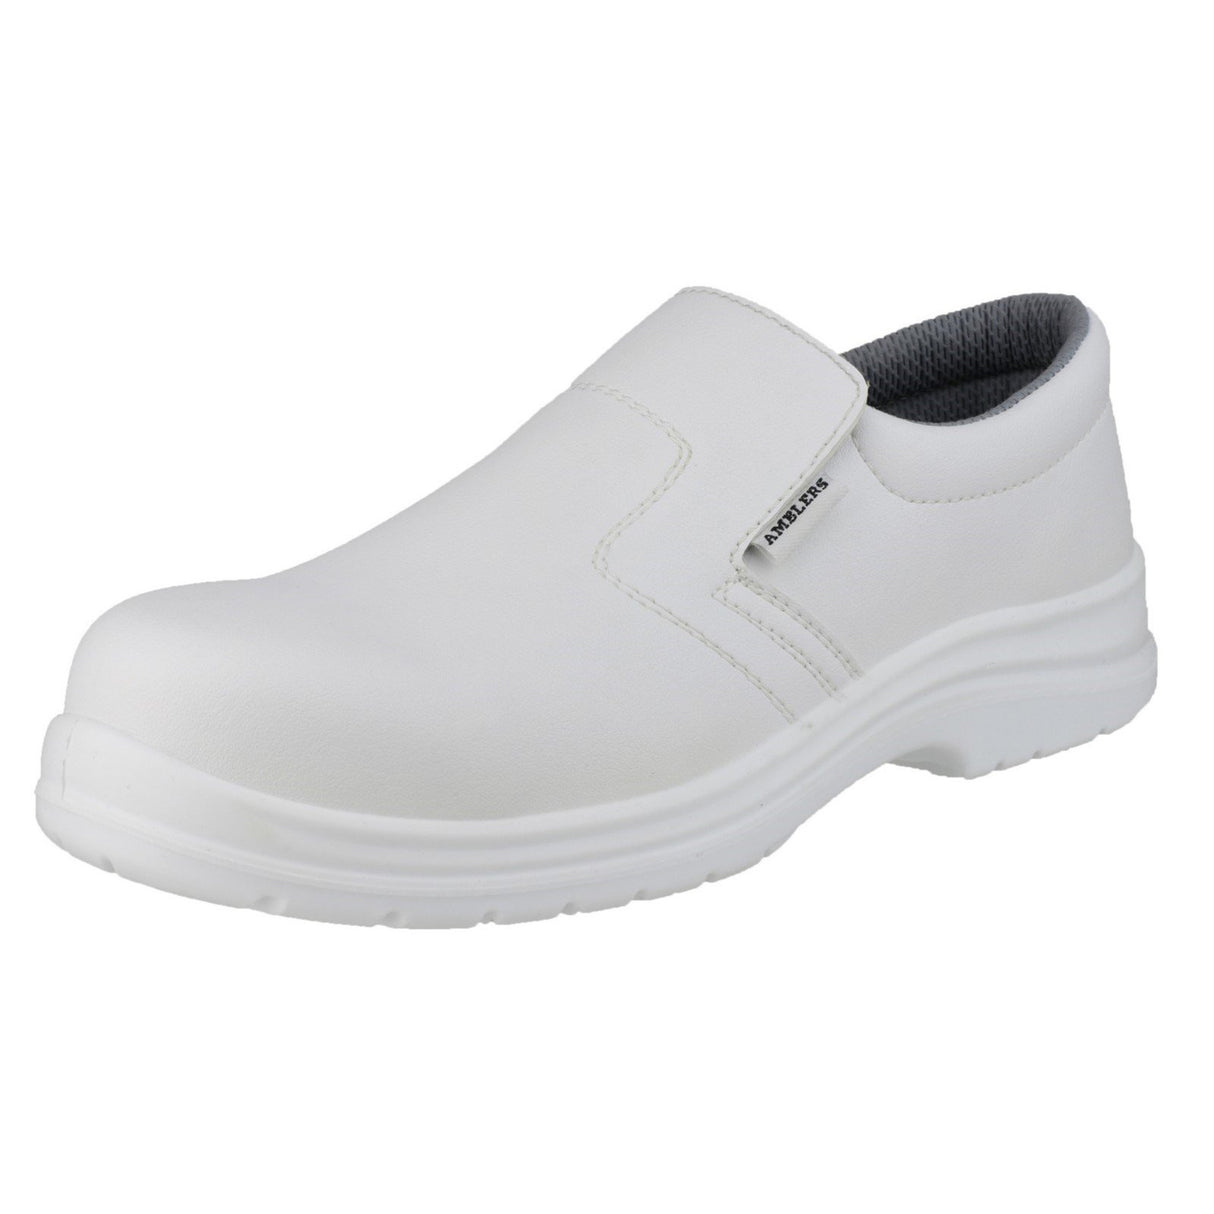 Amblers Safety FS510 Metal-Free Water-Resistant Slip On Safety Shoes